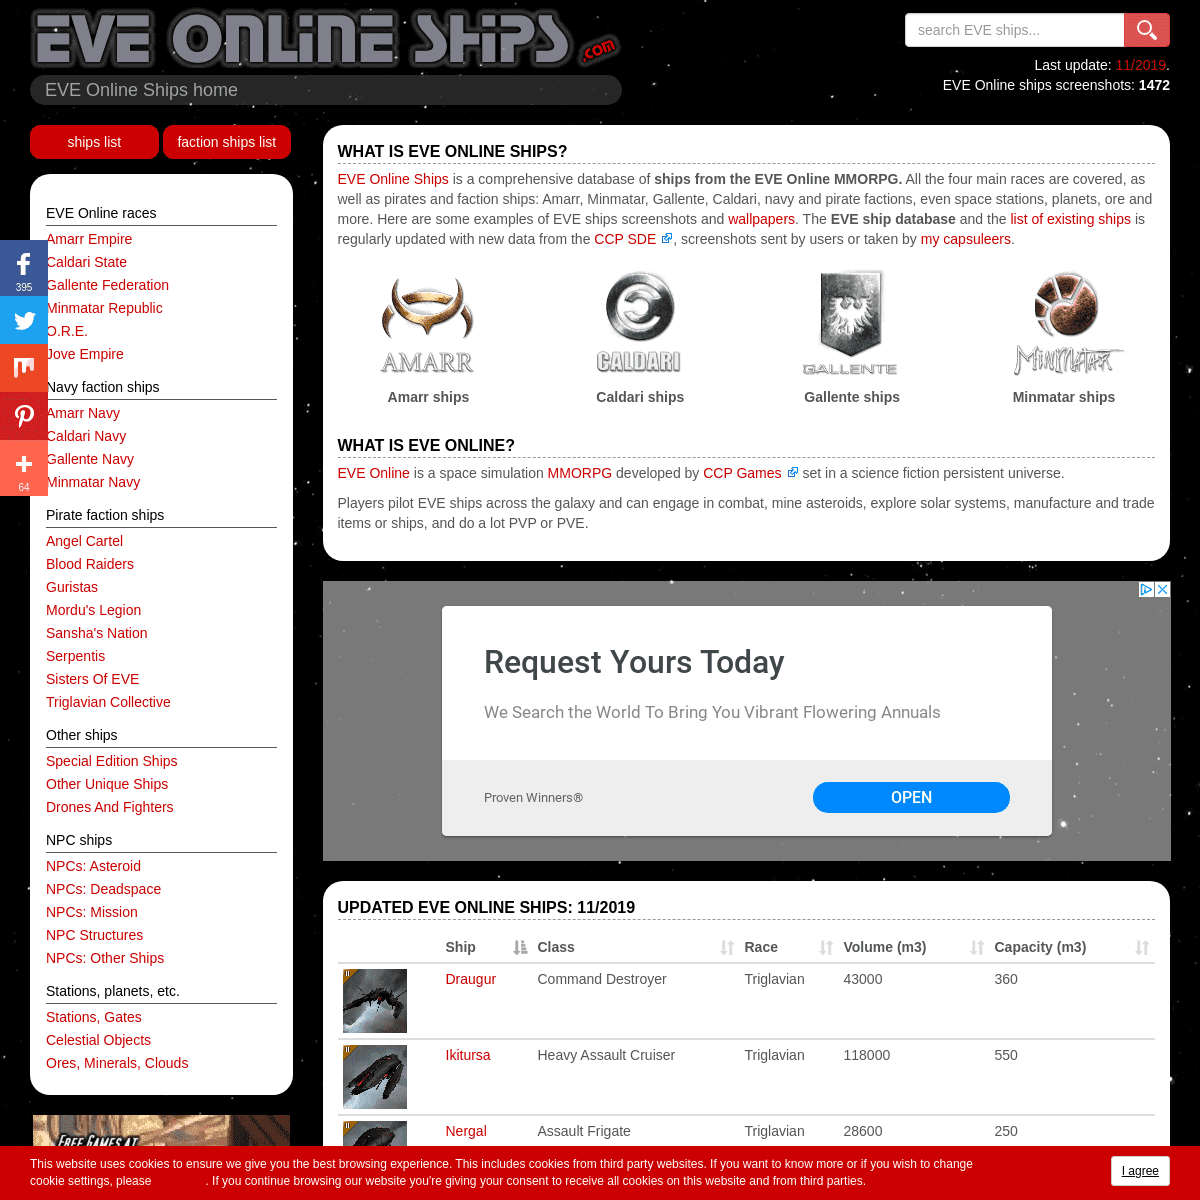 A complete backup of eveonlineships.com